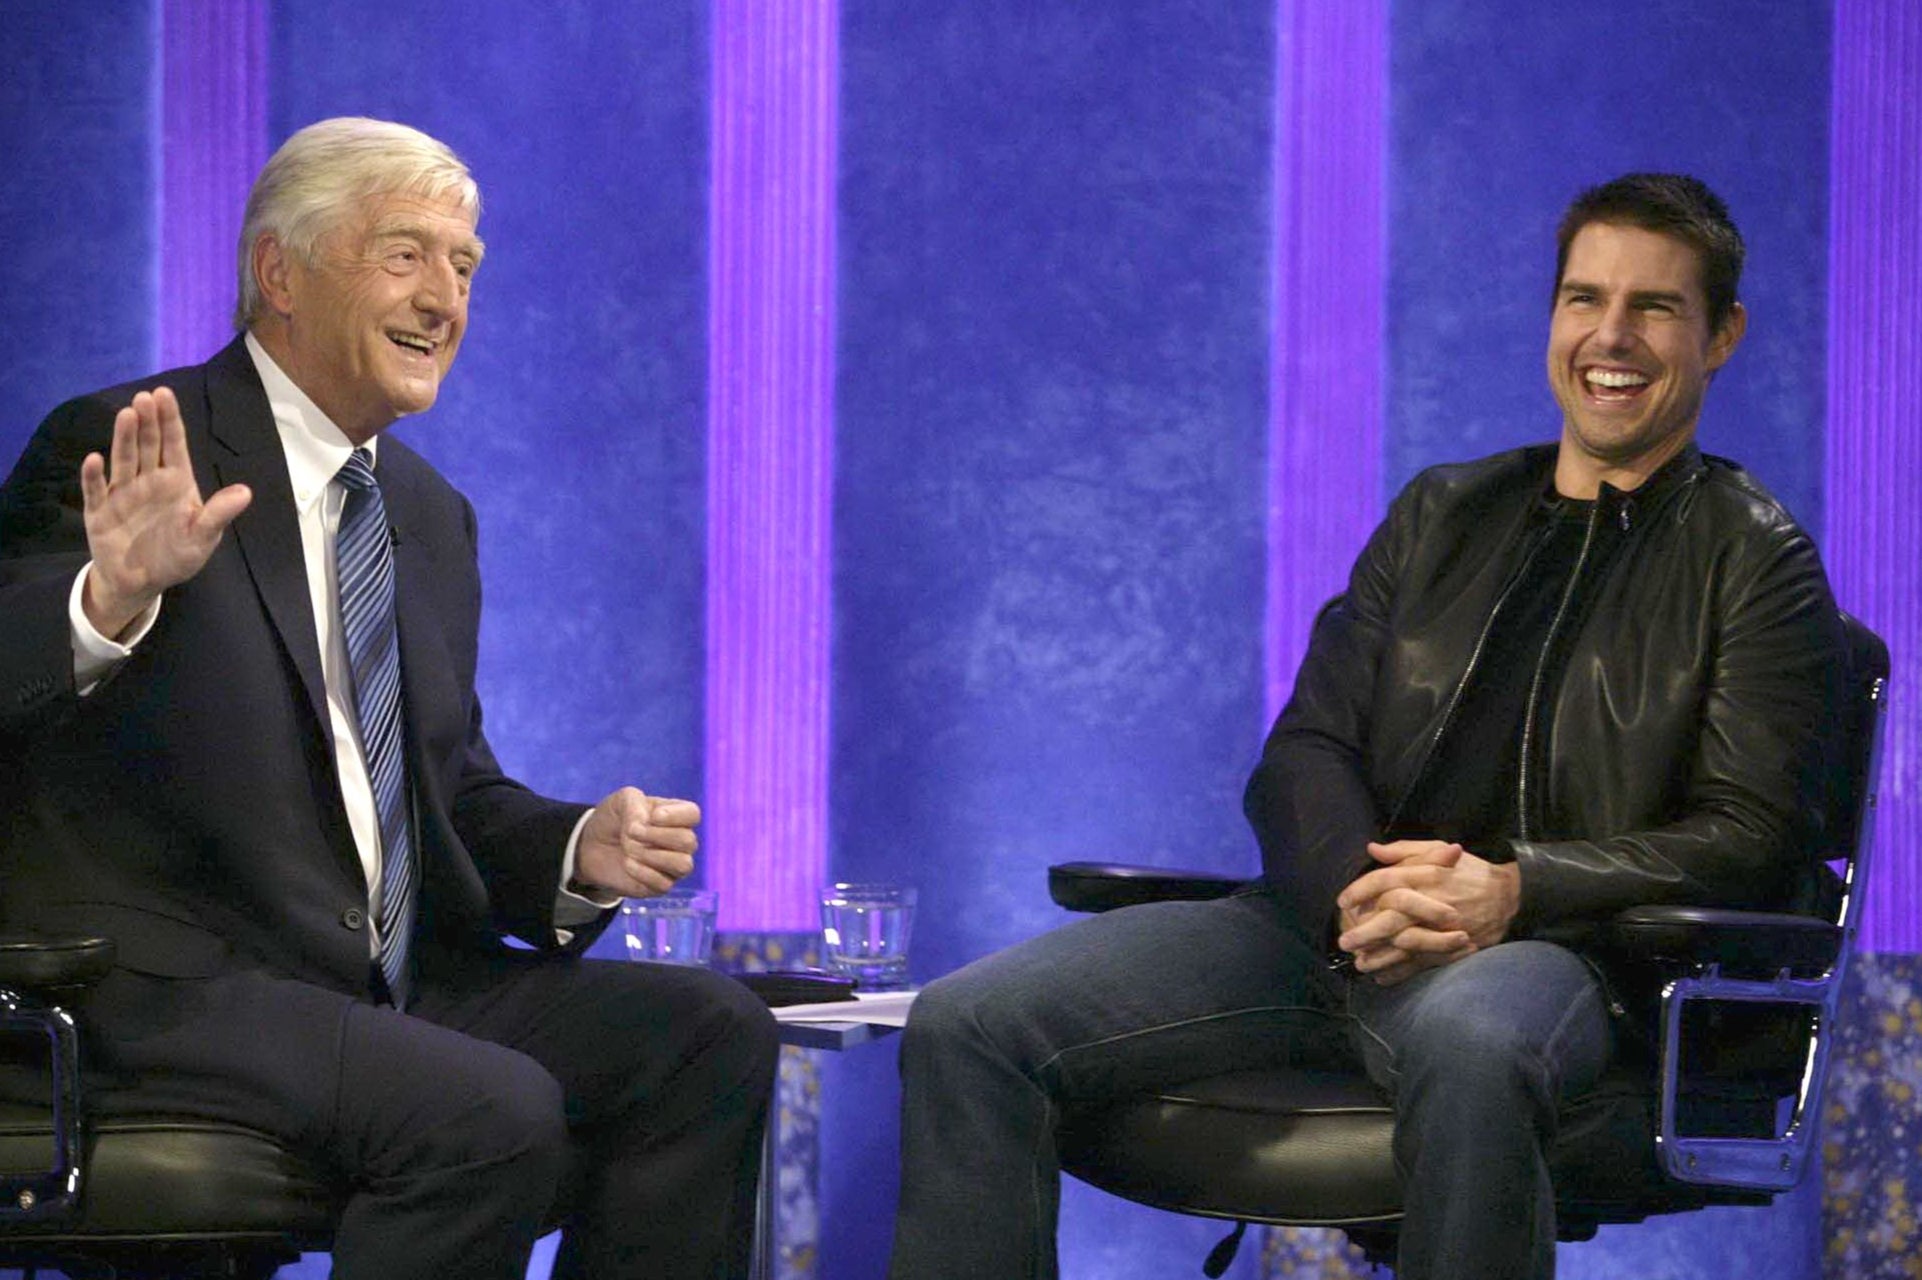 Tom Cruise appears on Michael Parkinson’s chat show in 2004